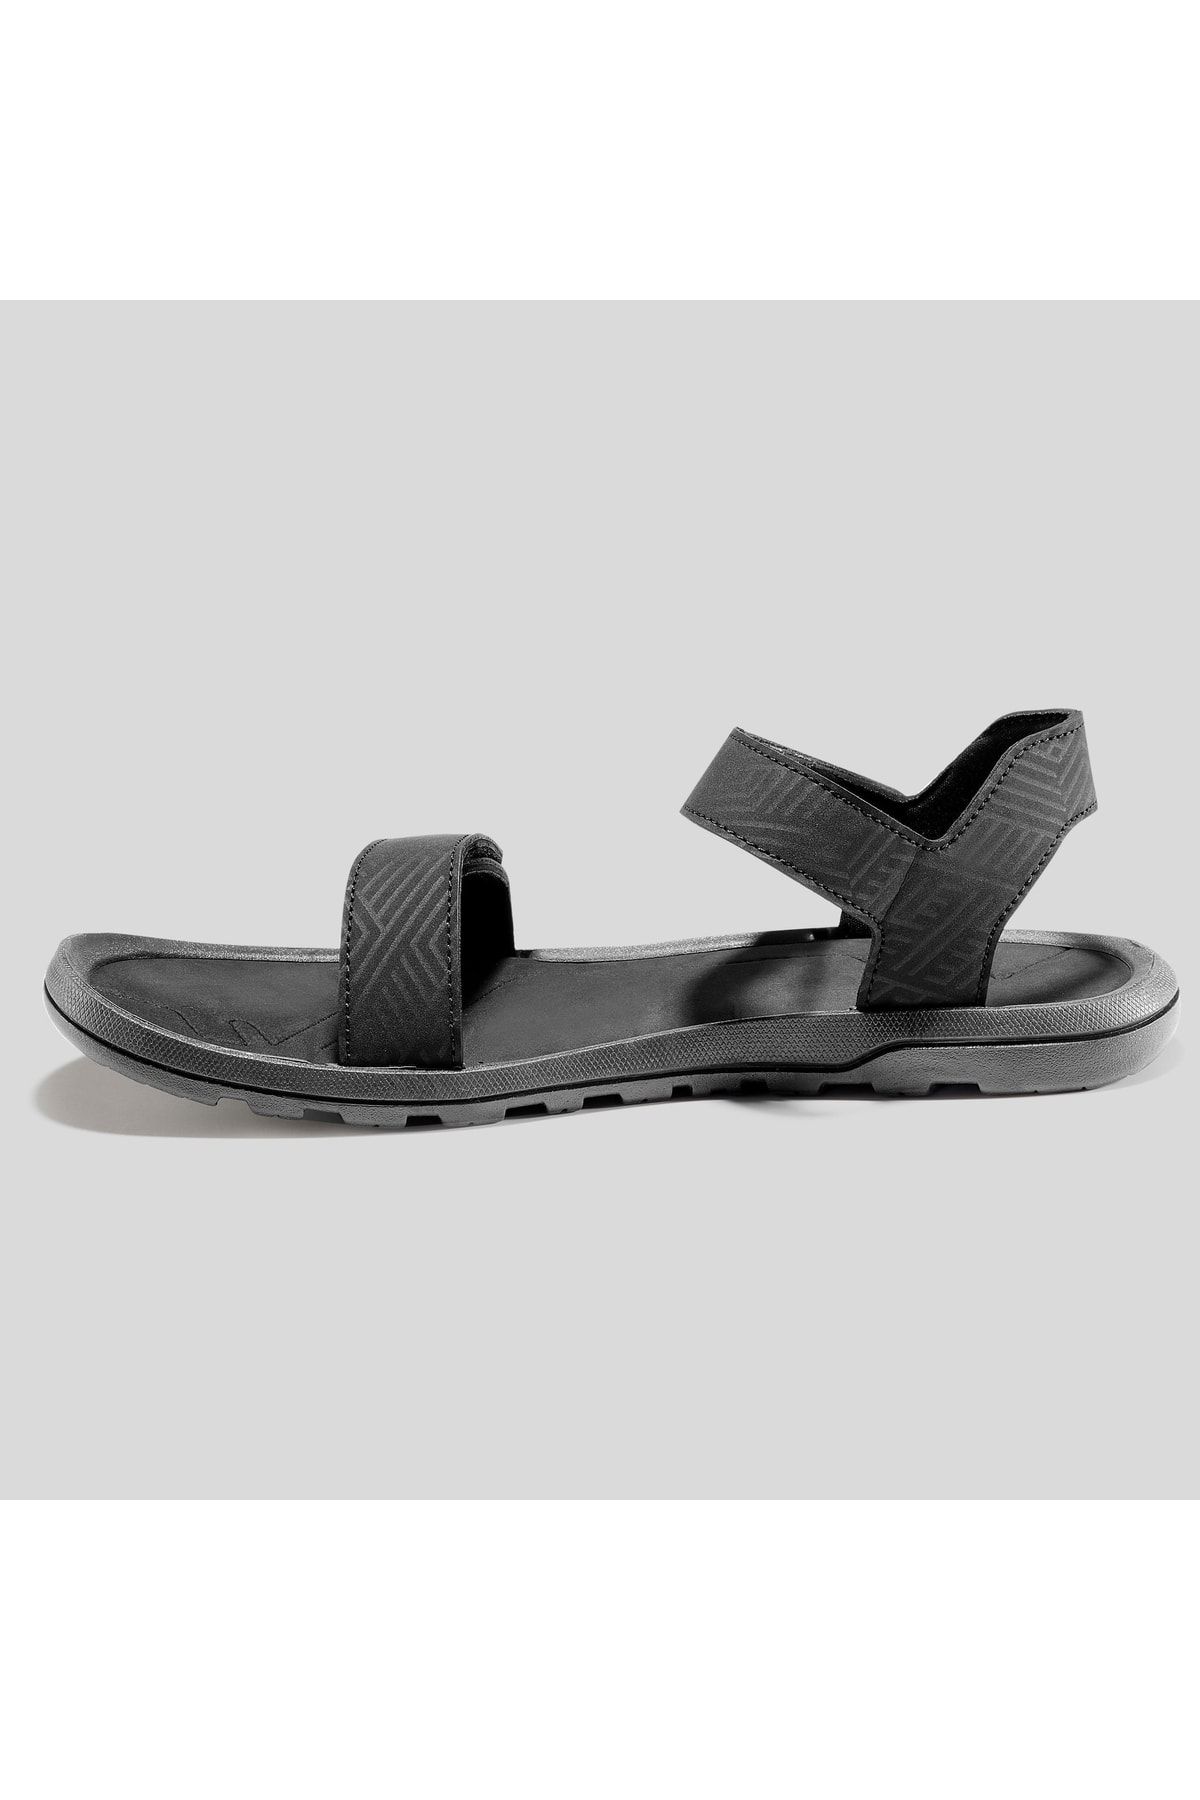 Synthetic Men's Hiking sandals - NH50 at Rs 699/pair in Bengaluru | ID:  25048846697